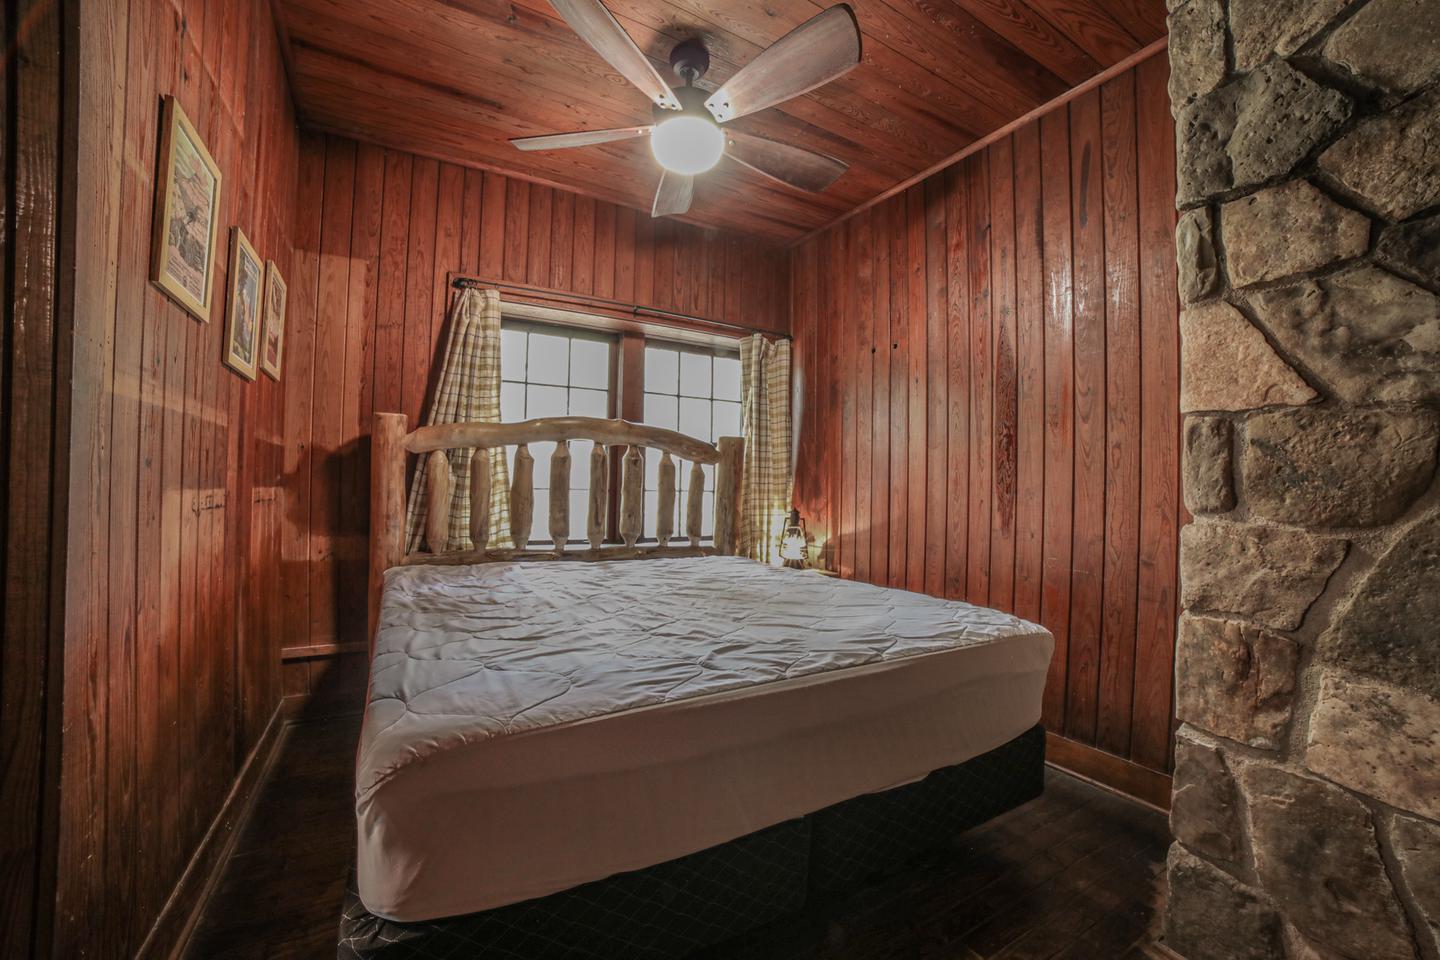 White Rock Mountain, Lodge Bedroom 2Bedroom 2 has one King sized bed. Attached is one 1/2 bath.